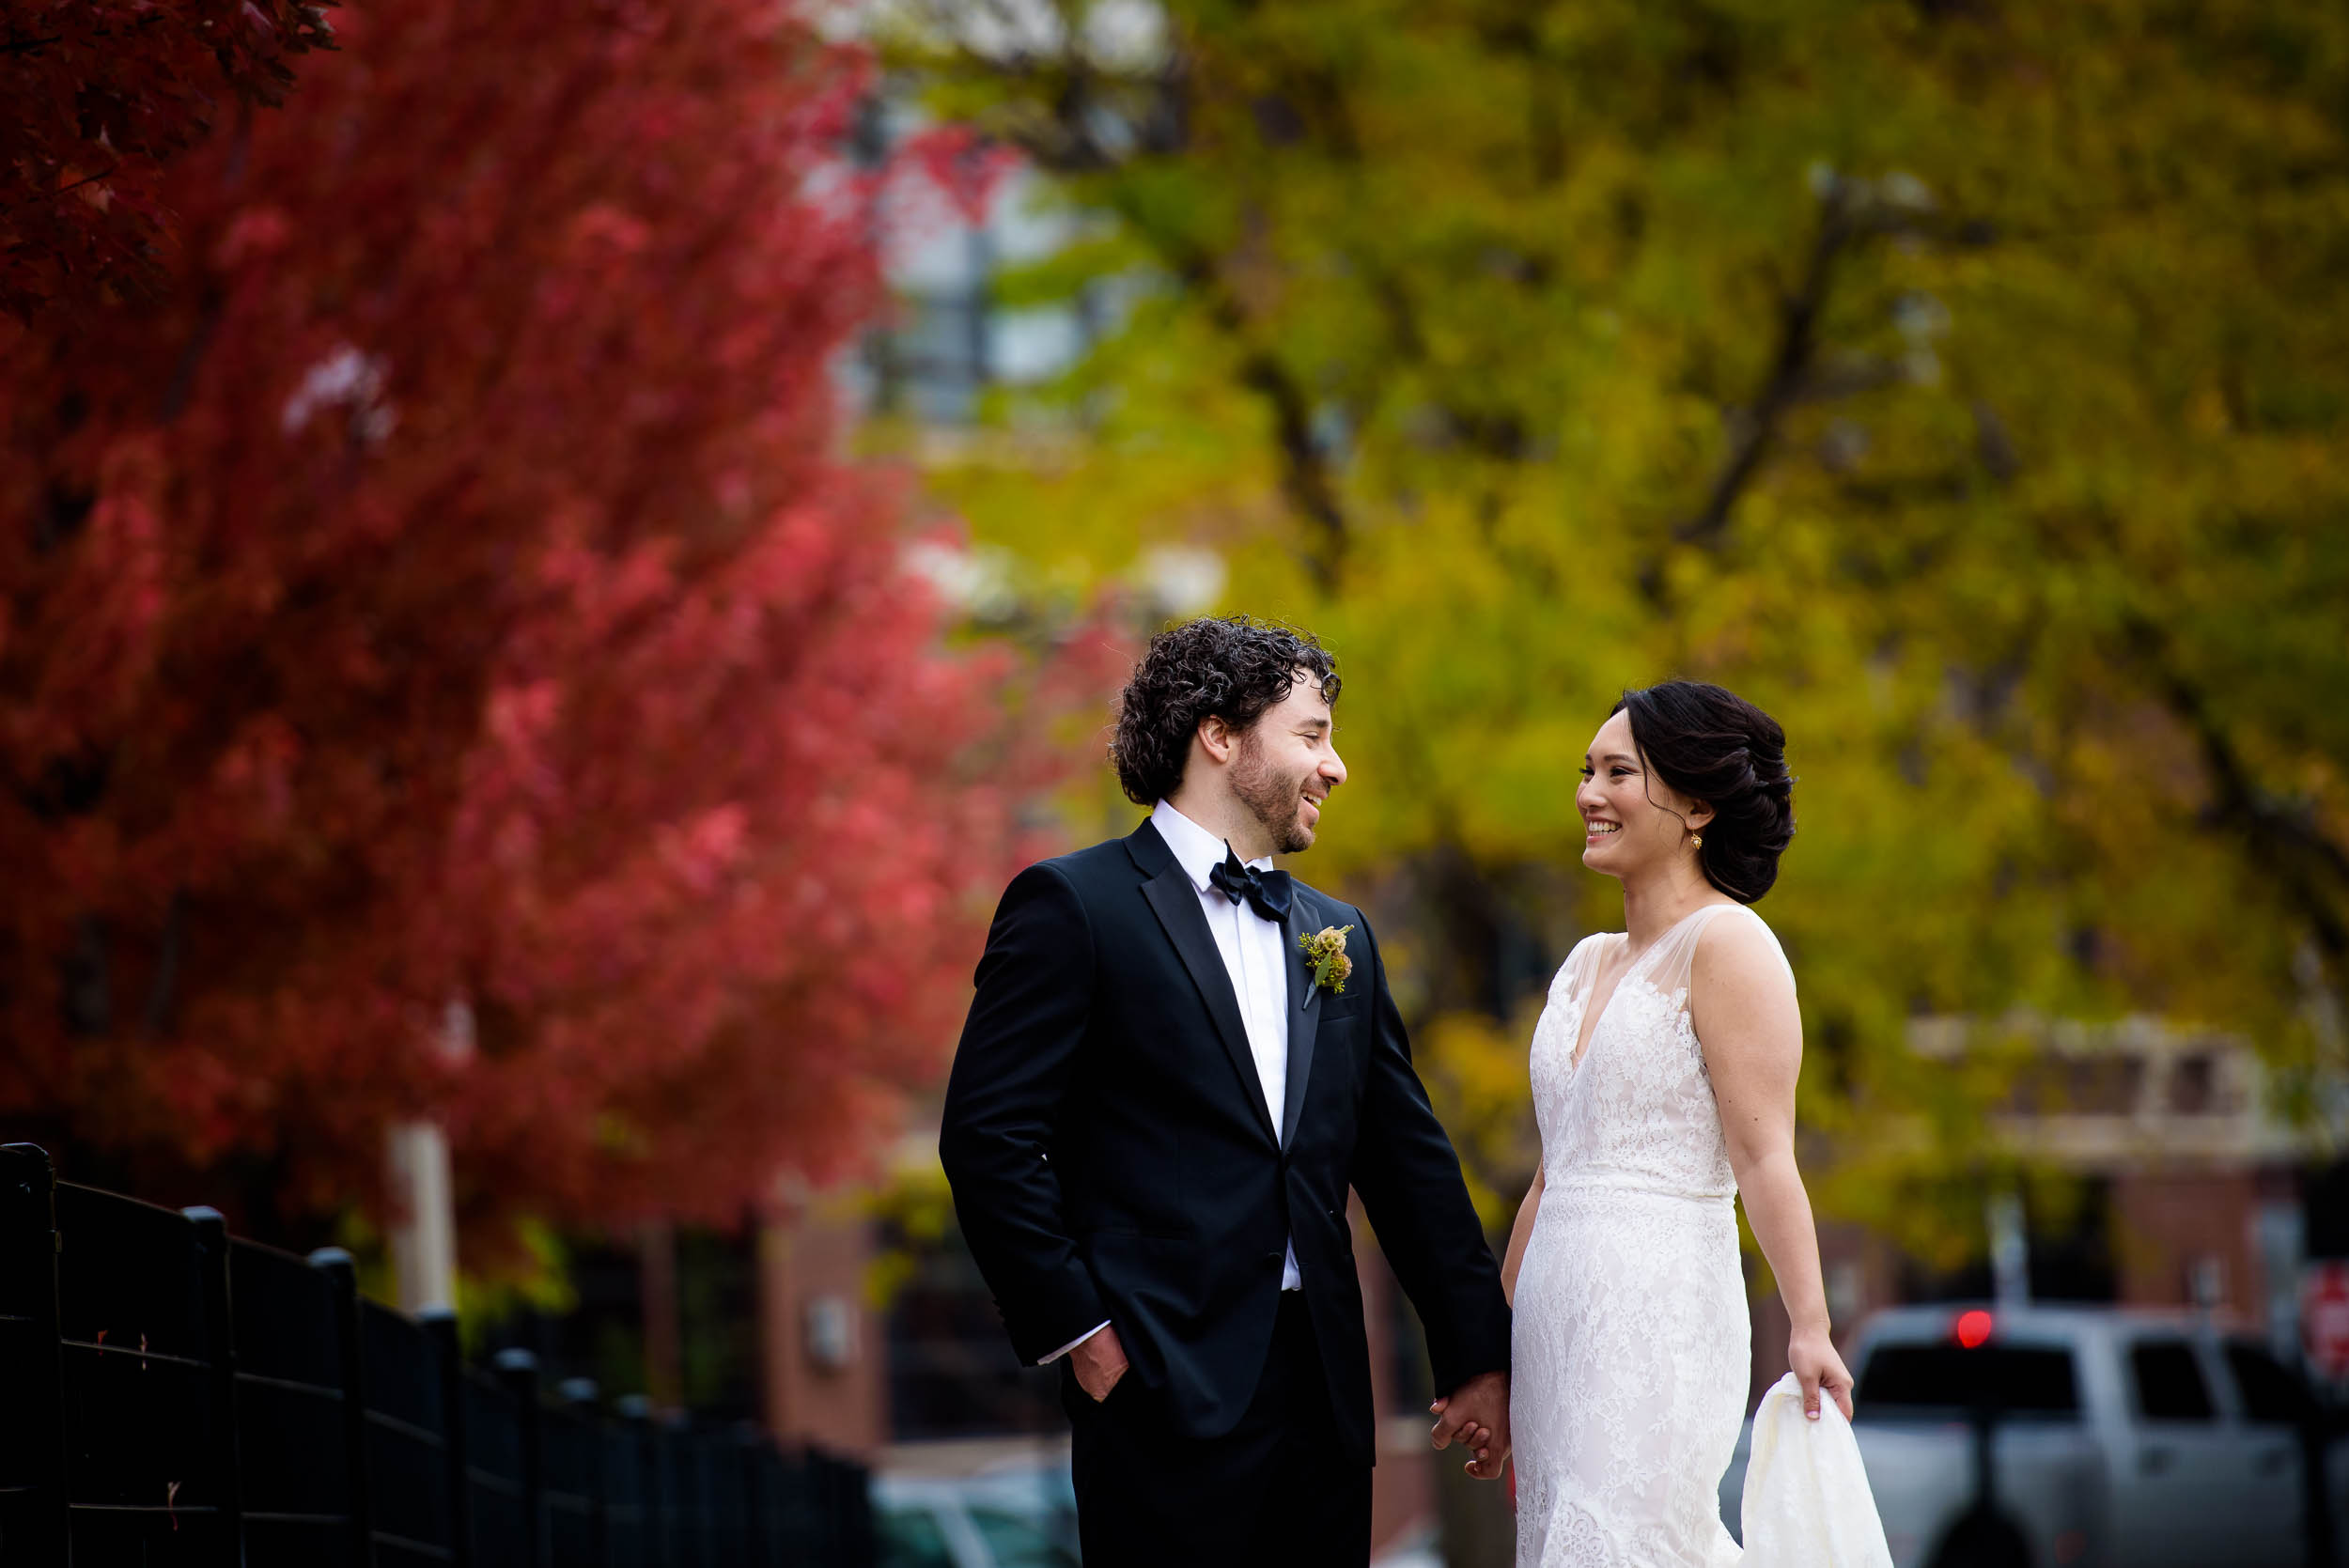 Bride and groom laugh together during their wedding photo session at Mary Bartelme Park Chicago.